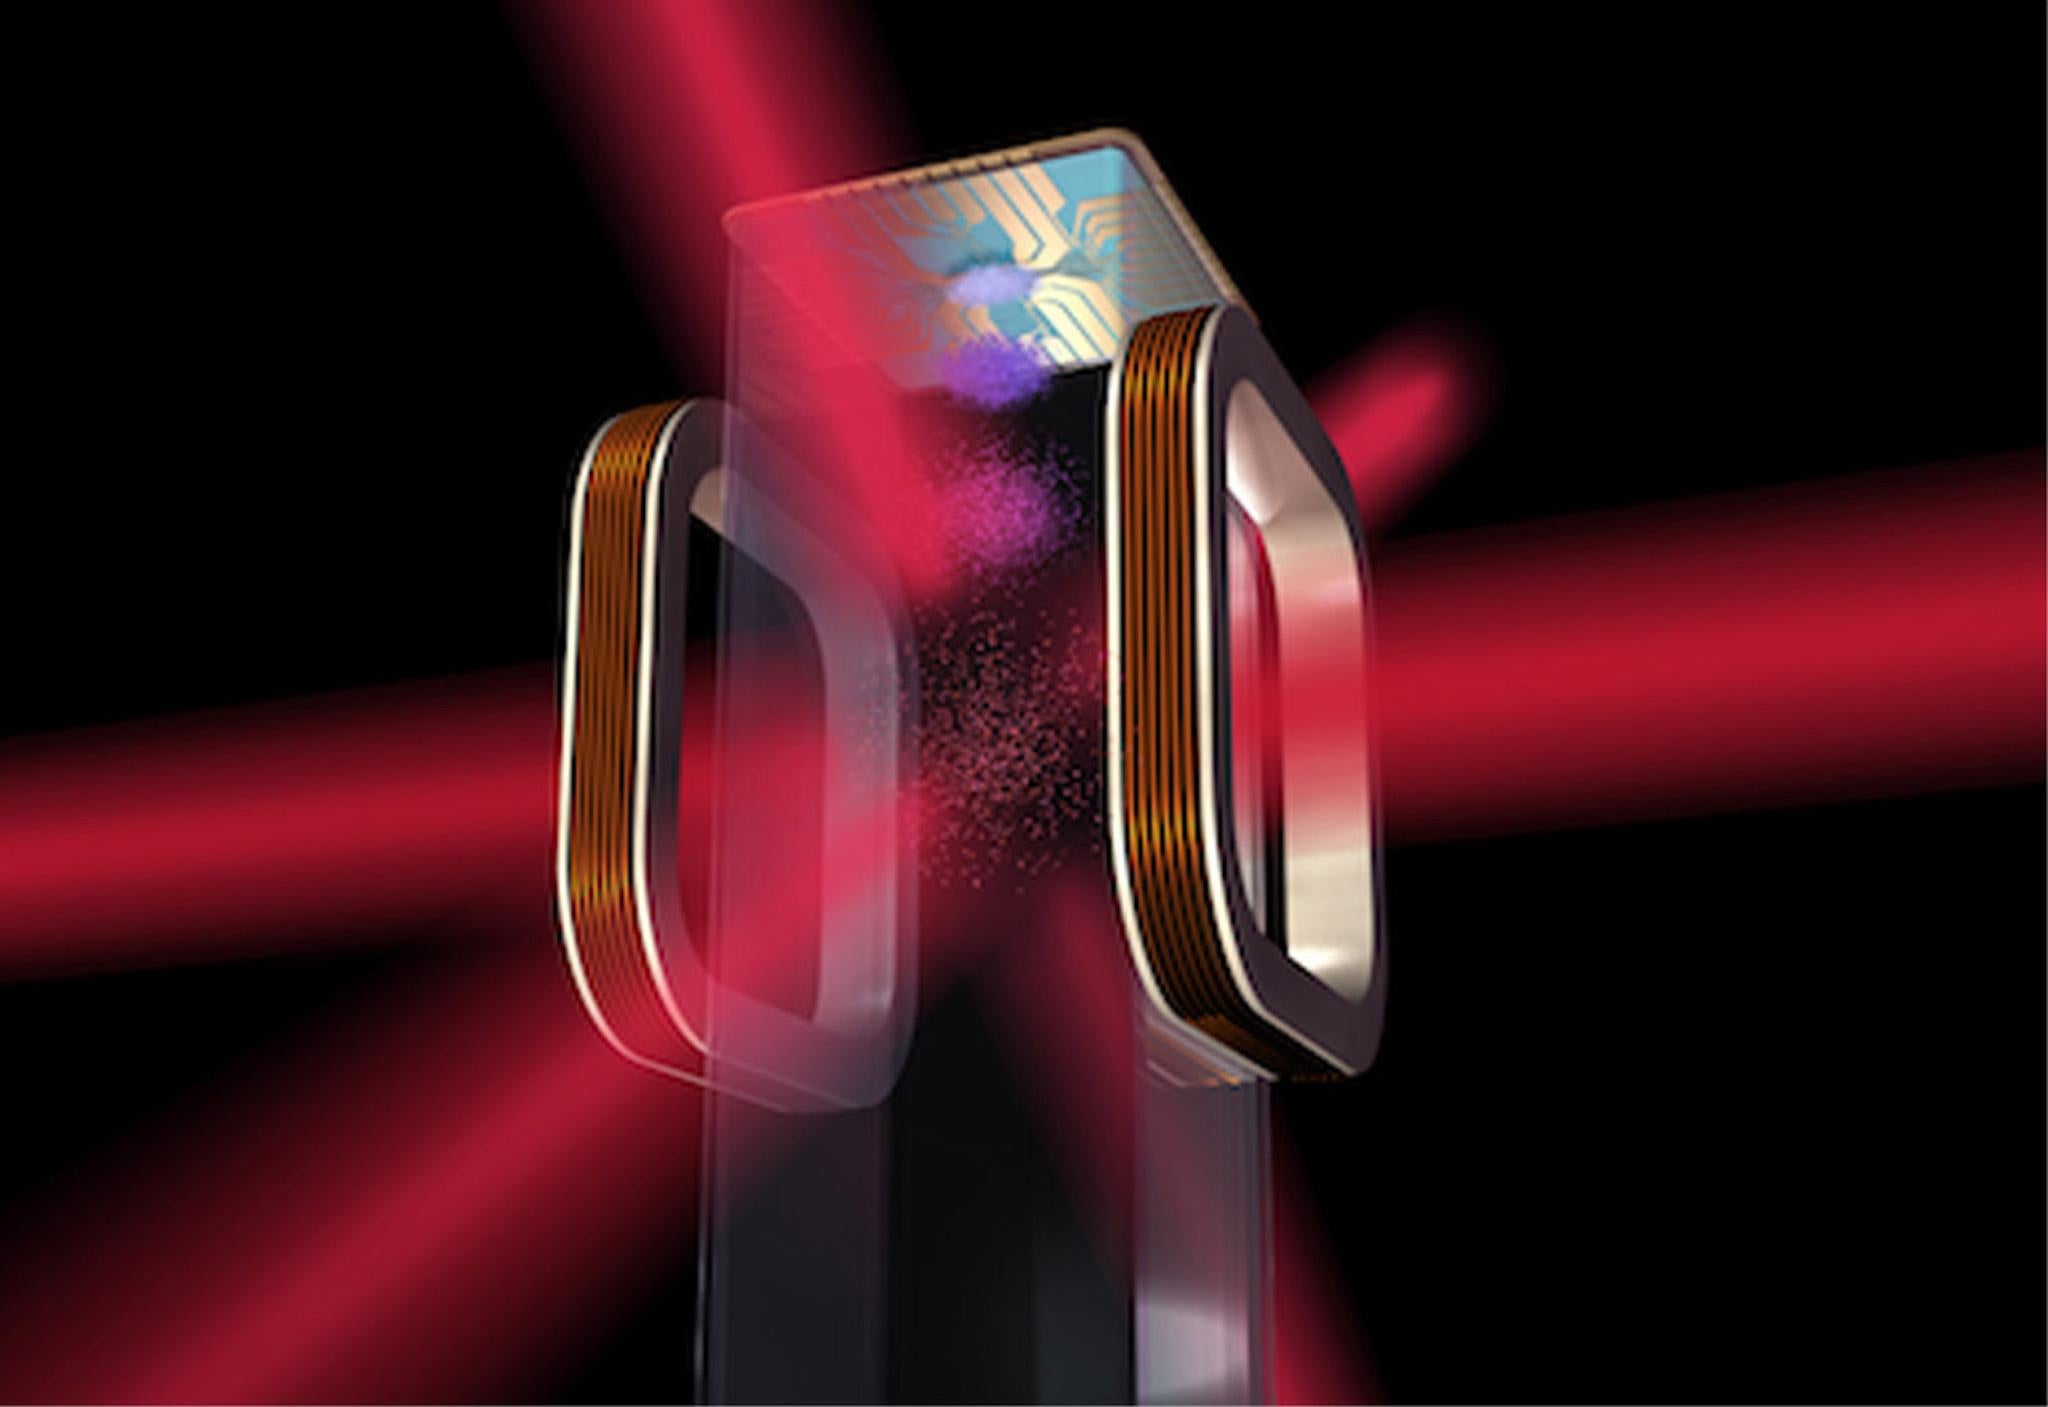 Artist's concept of a magneto-optical trap and atom chip to be used by NASA's Cold Atom Laboratory (CAL) aboard the International Space Station